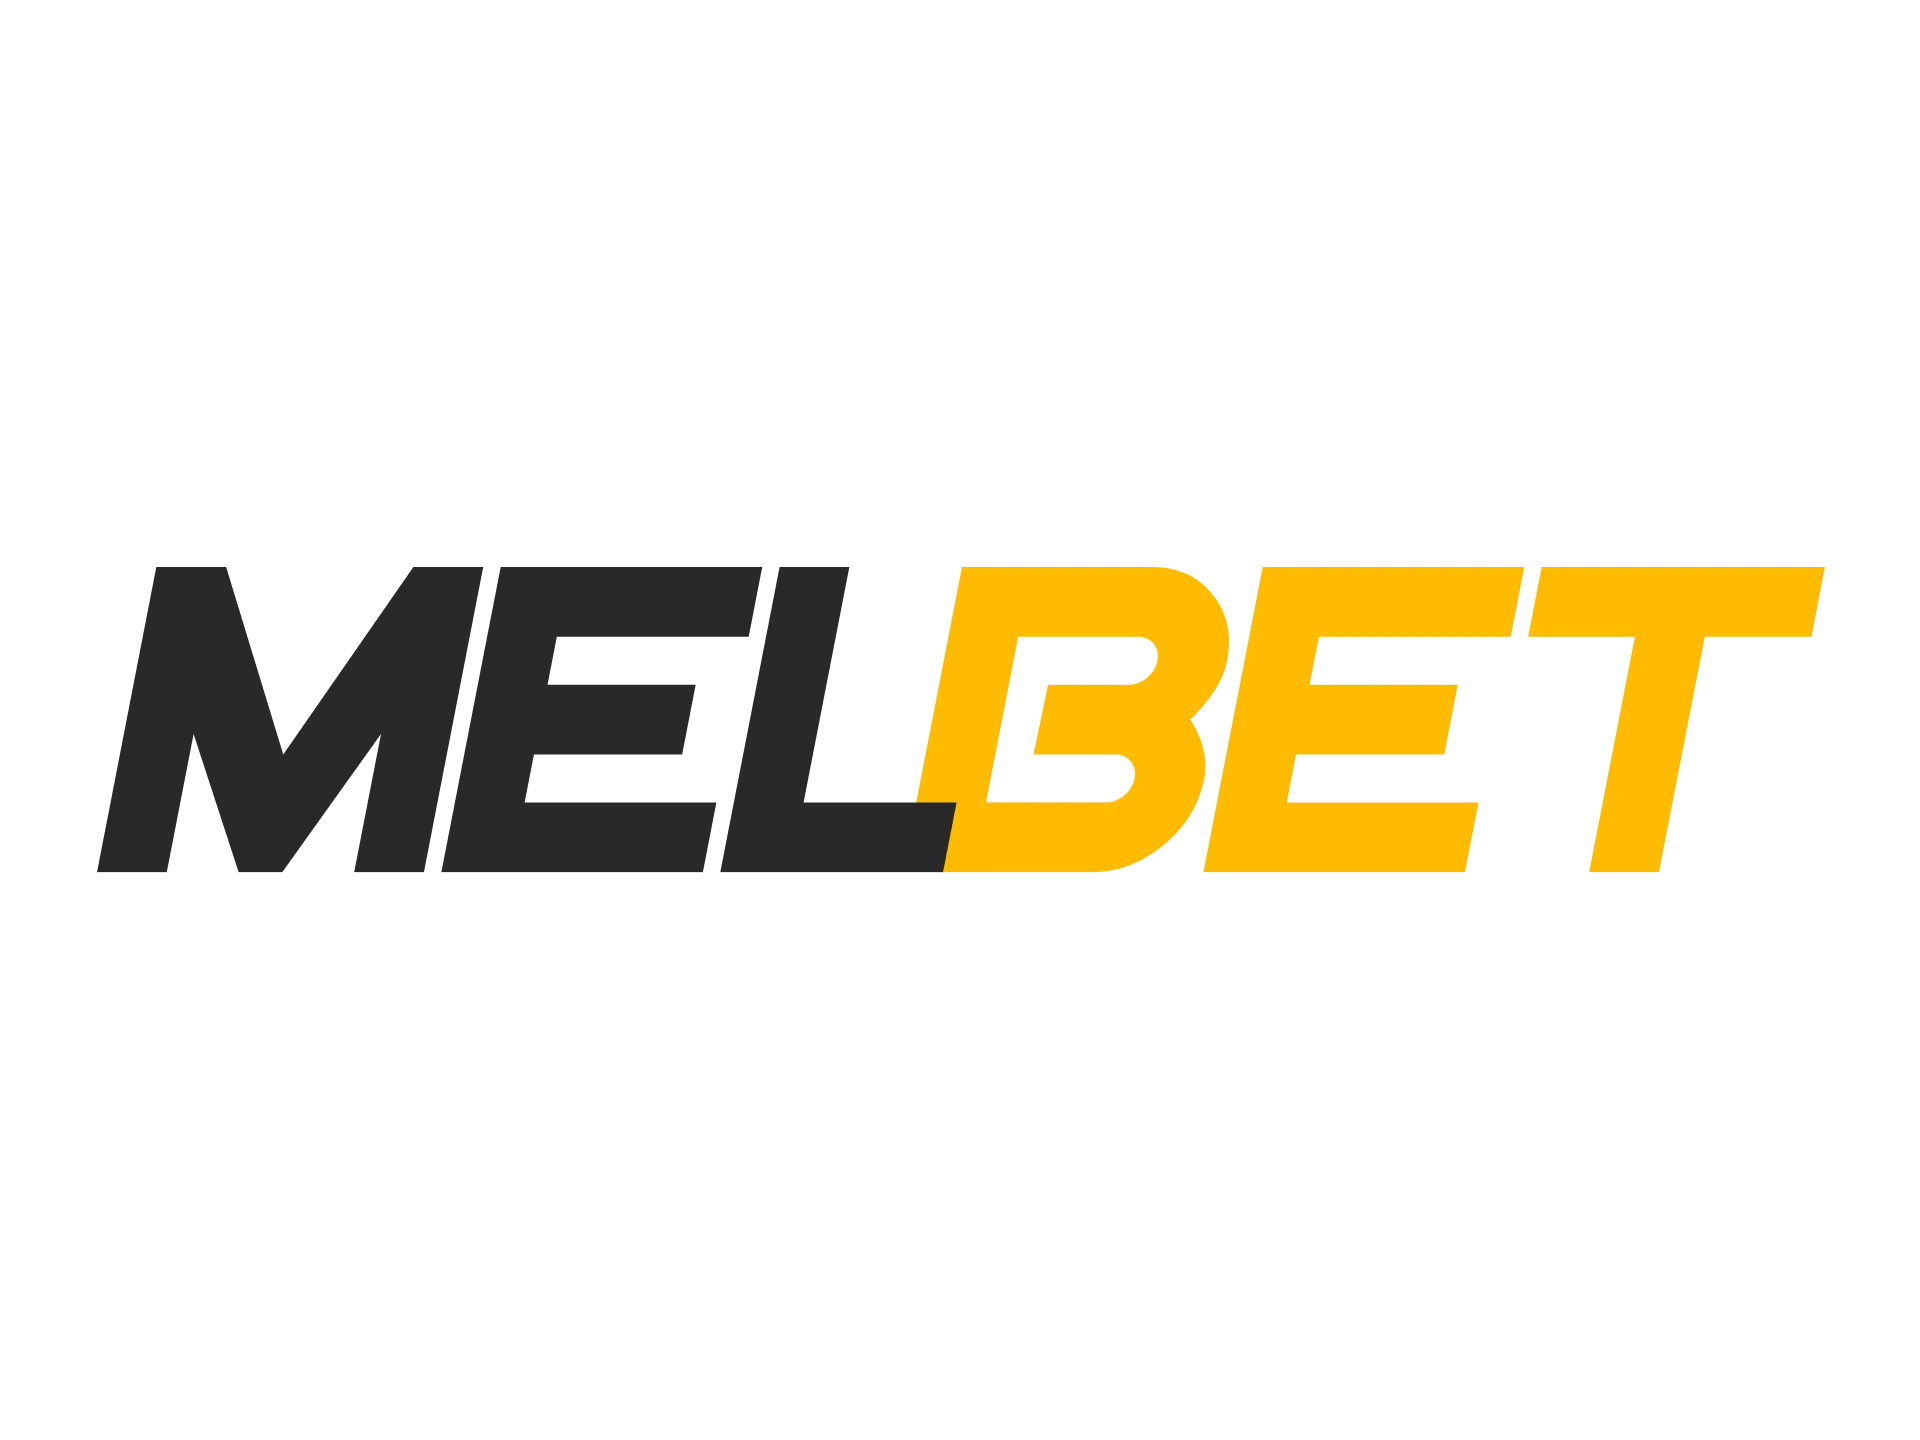 You can bet on cricket using your phone using the Melbet app.